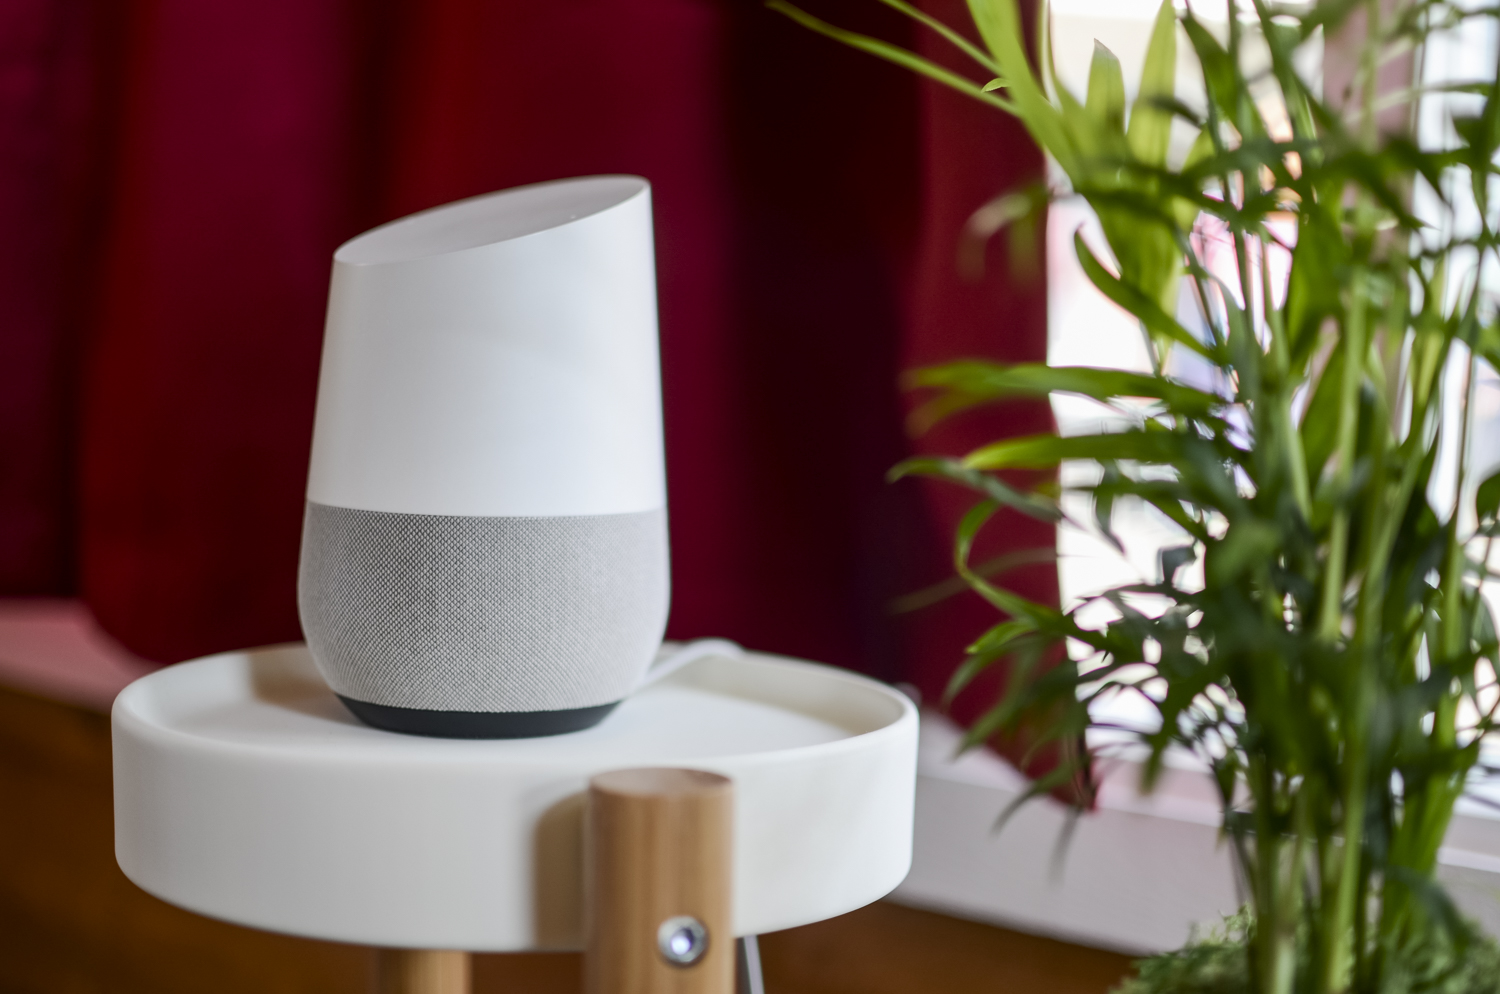 The Most Useful Skills for Google Home